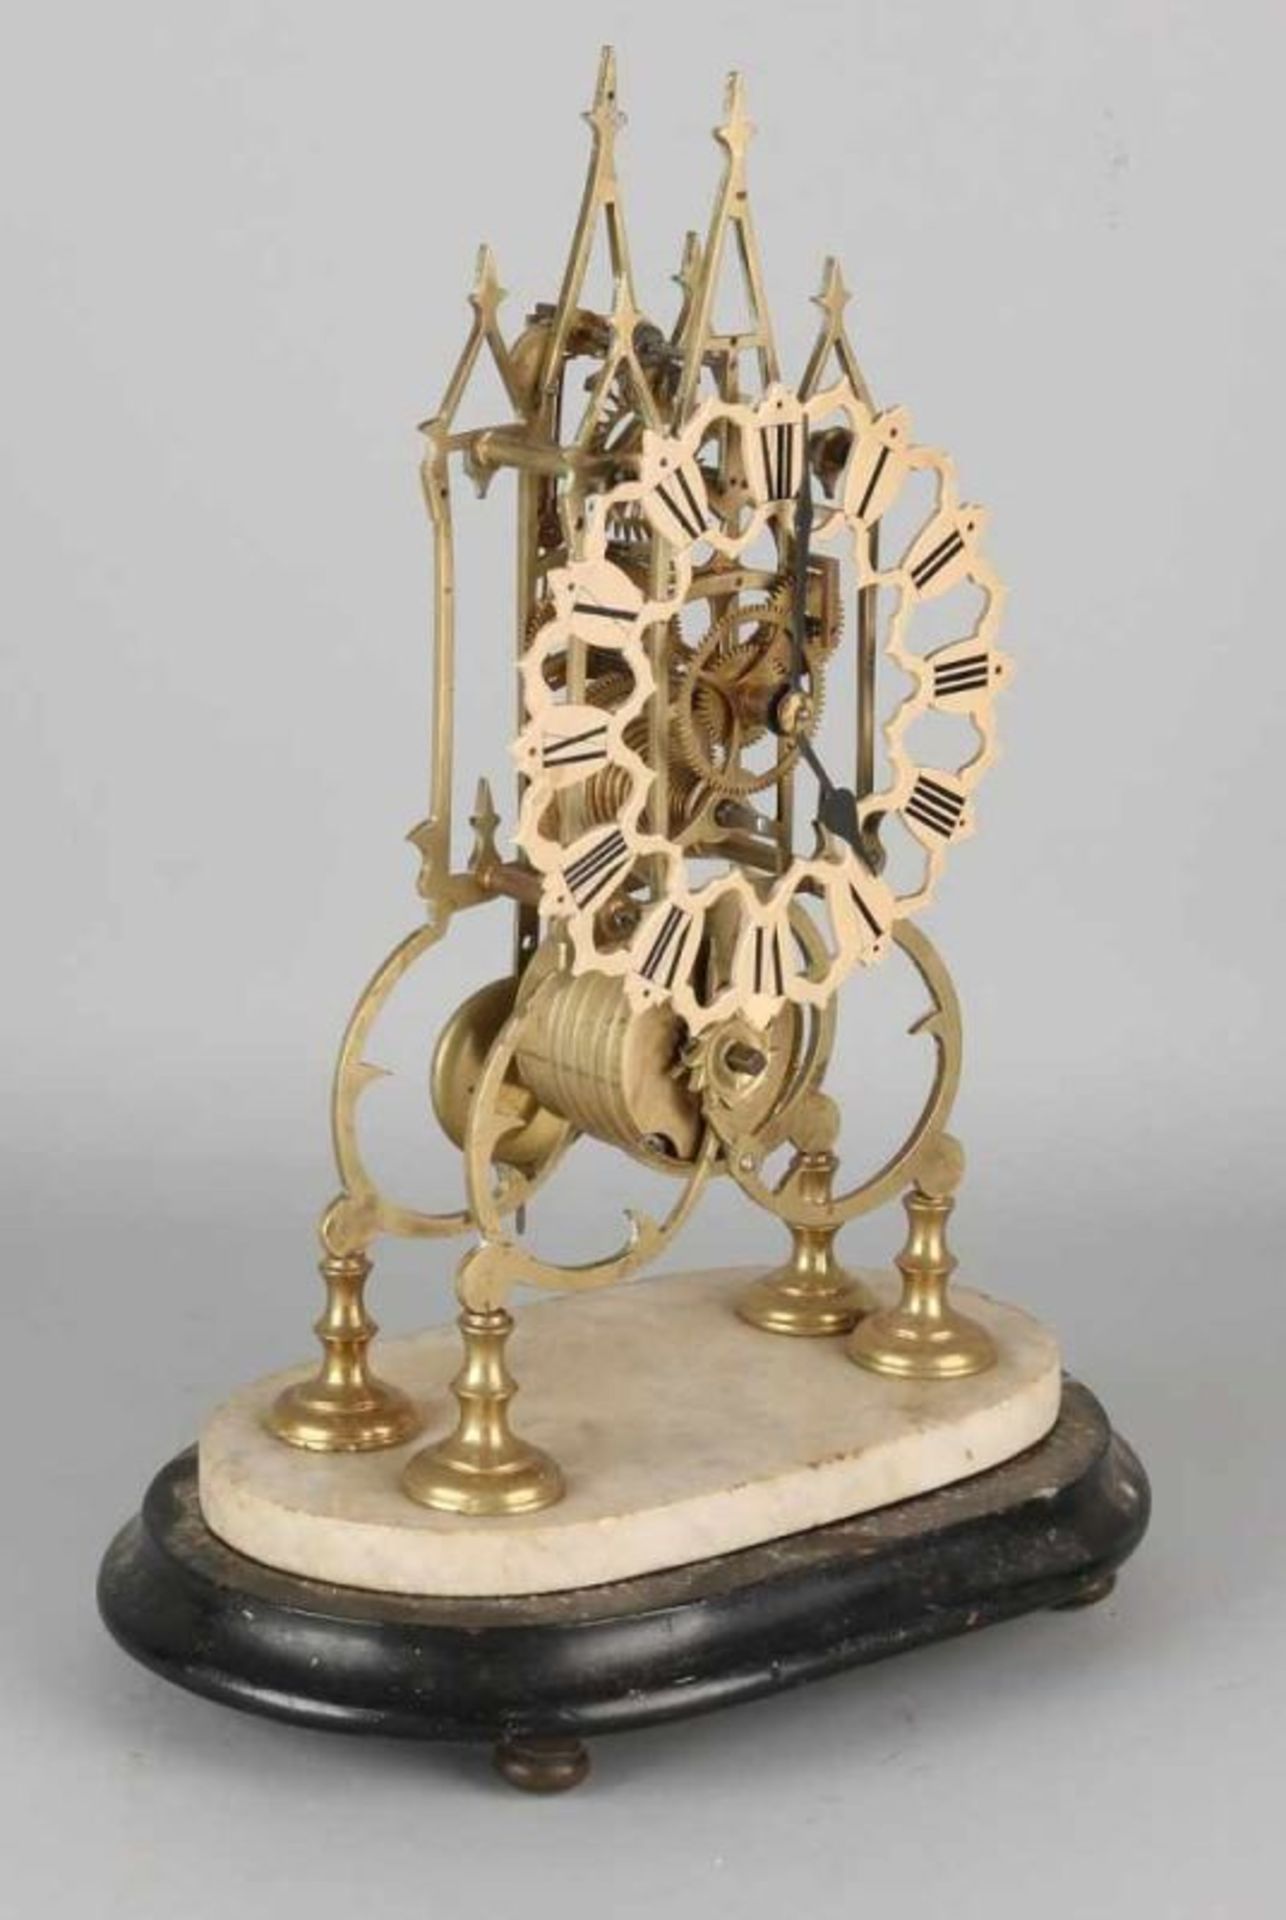 Antique English brass skeleton clock with fusee. On wood with alabaster basement. Circa 1880. - Image 2 of 3